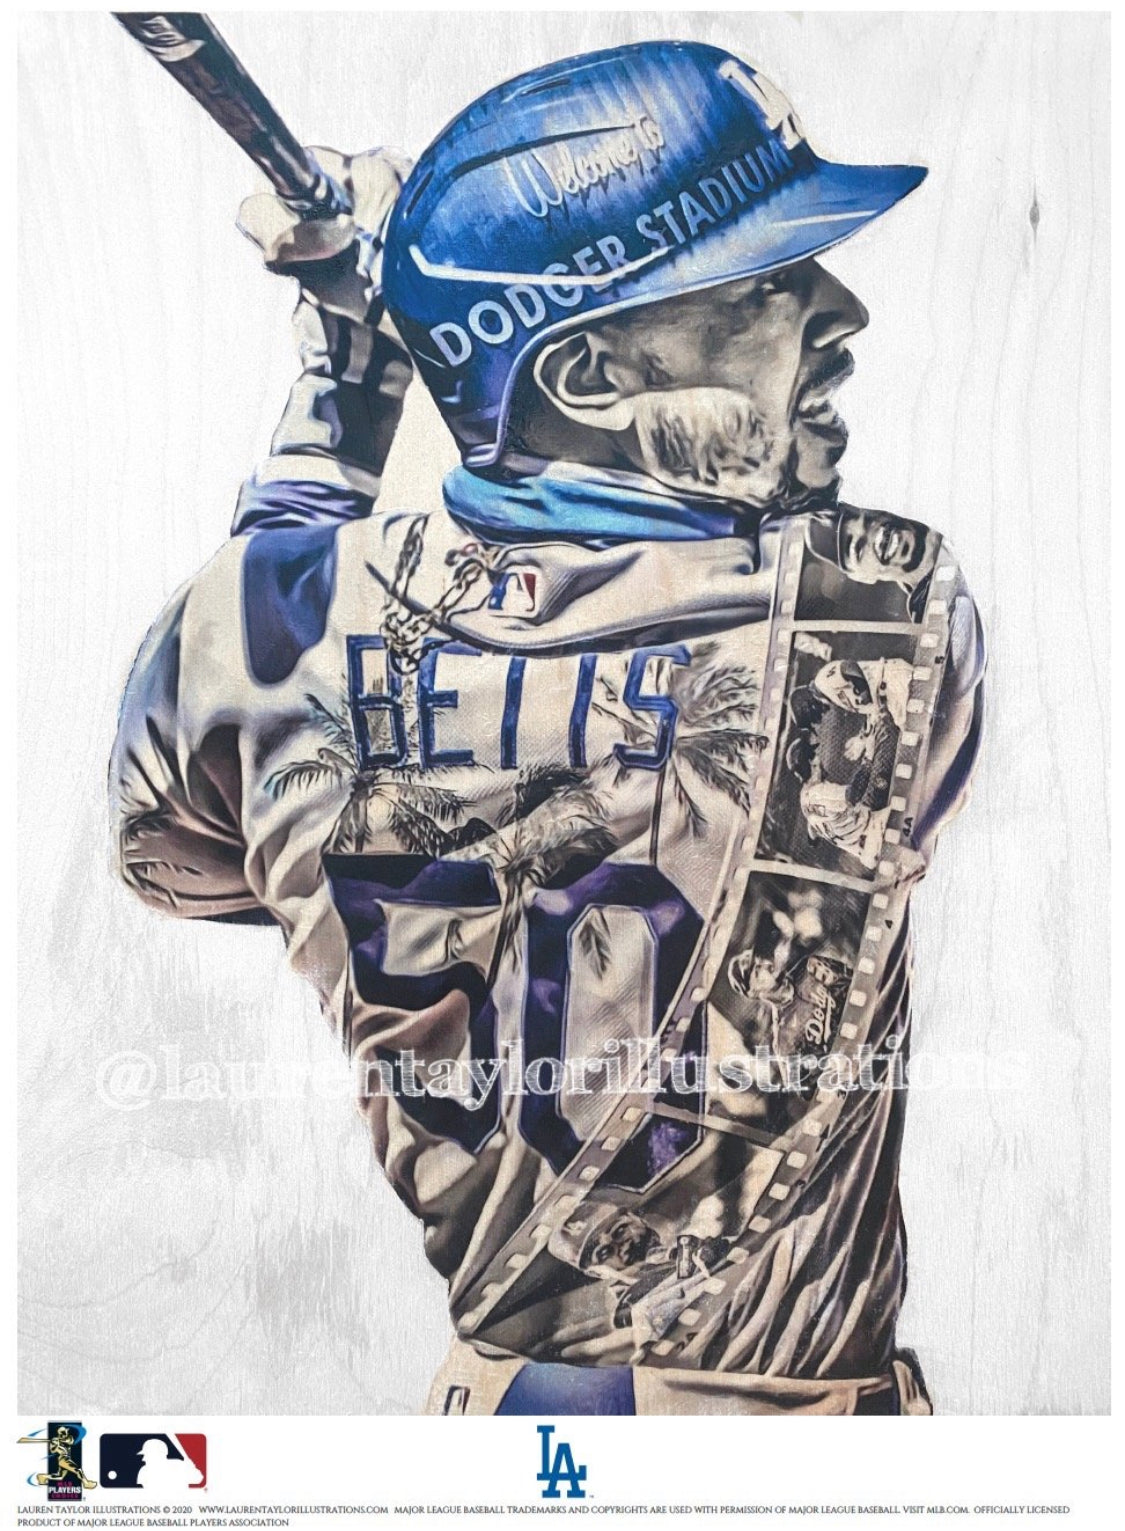 Mookie Betts La Dodgers Shout-Out Signed Photo – Poster - Canvas